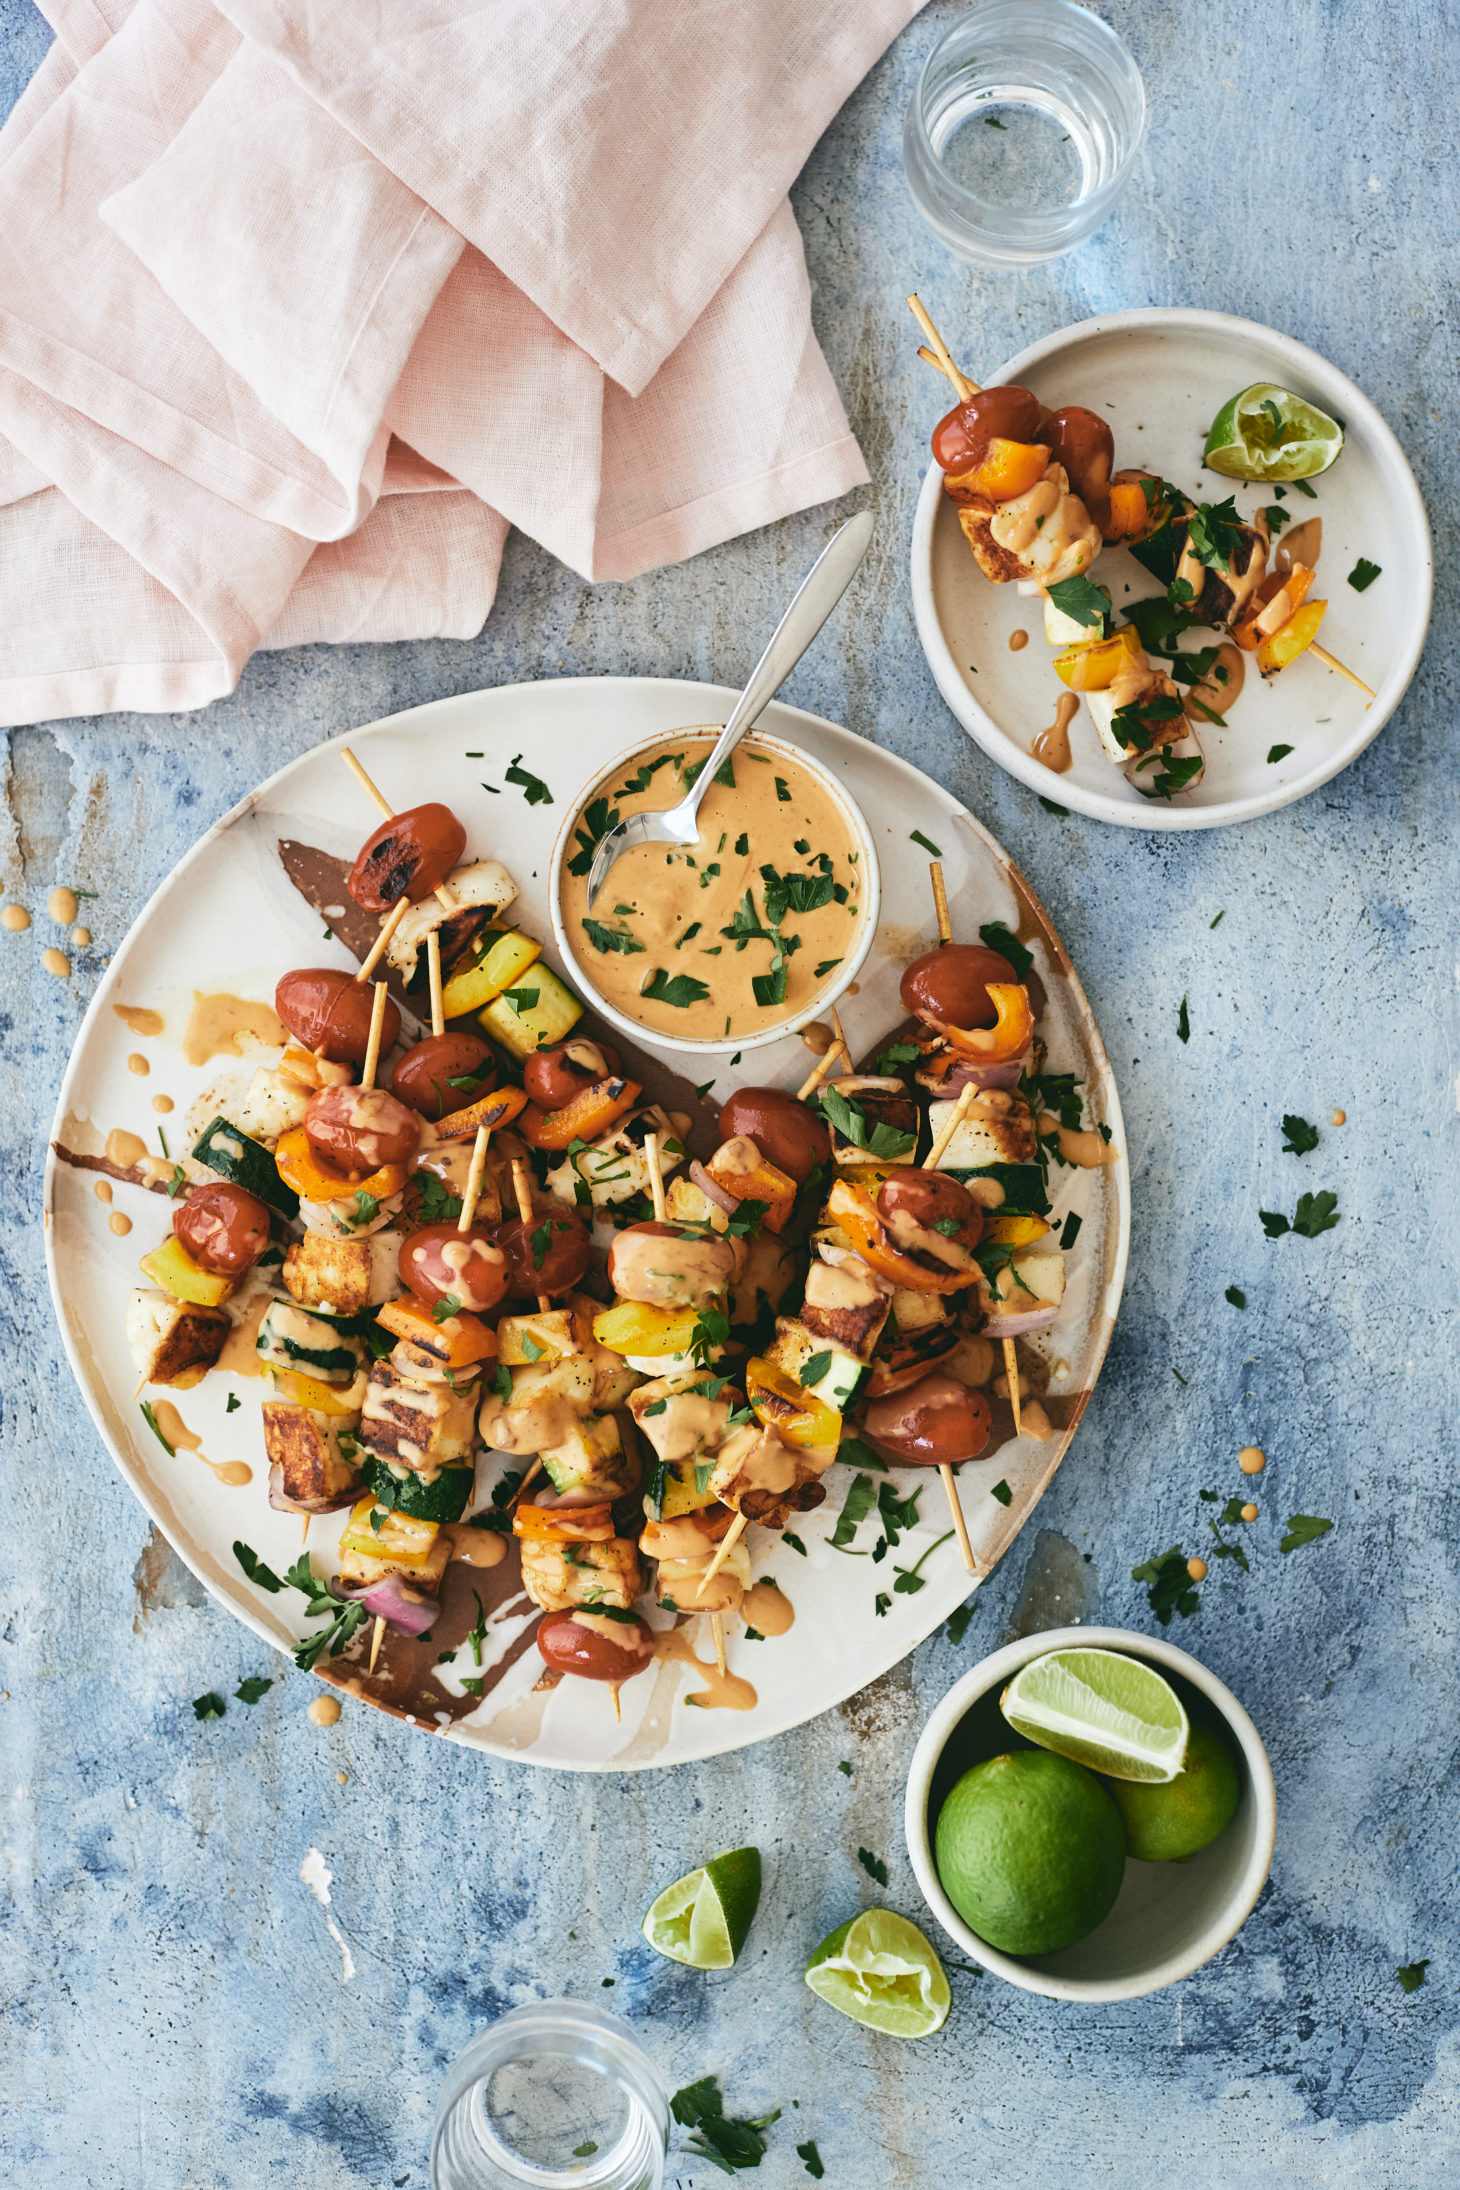 Marinated Halloumi Skewers with Summer Veg and Chipotle-Lime Peanut Sauce